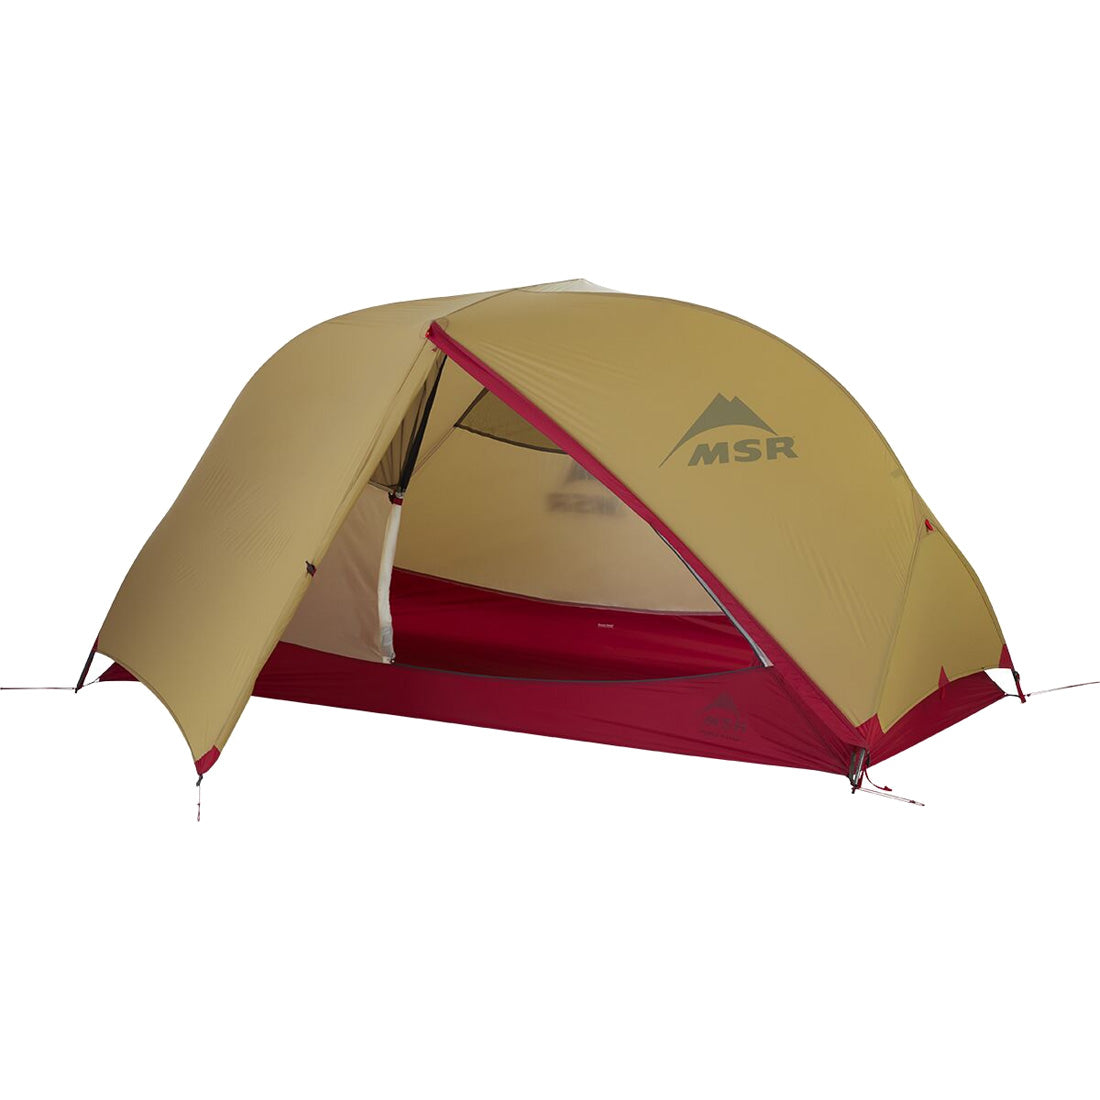 MSR (Cascade Designs) Hubba Hubba 1-Person Backpacking Tent